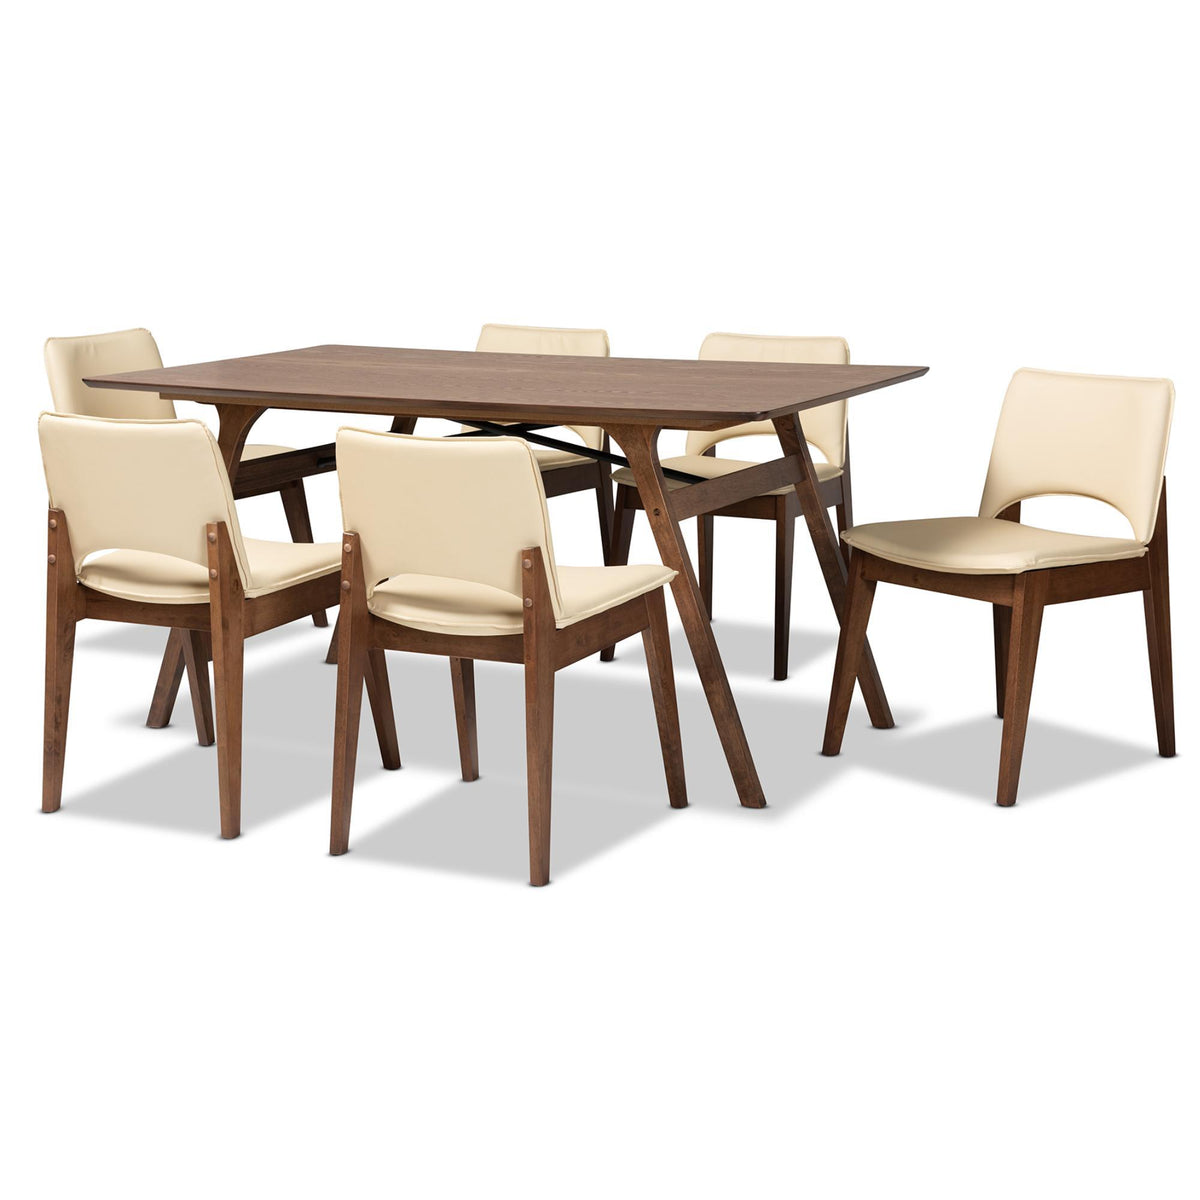 Baxton Studio Afton Mid-Century Modern Beige Faux Leather Upholstered And Walnut Brown Finished Wood 7-Piece Dining Set - RDC827-Beige/Walnut-7PC Dining Set